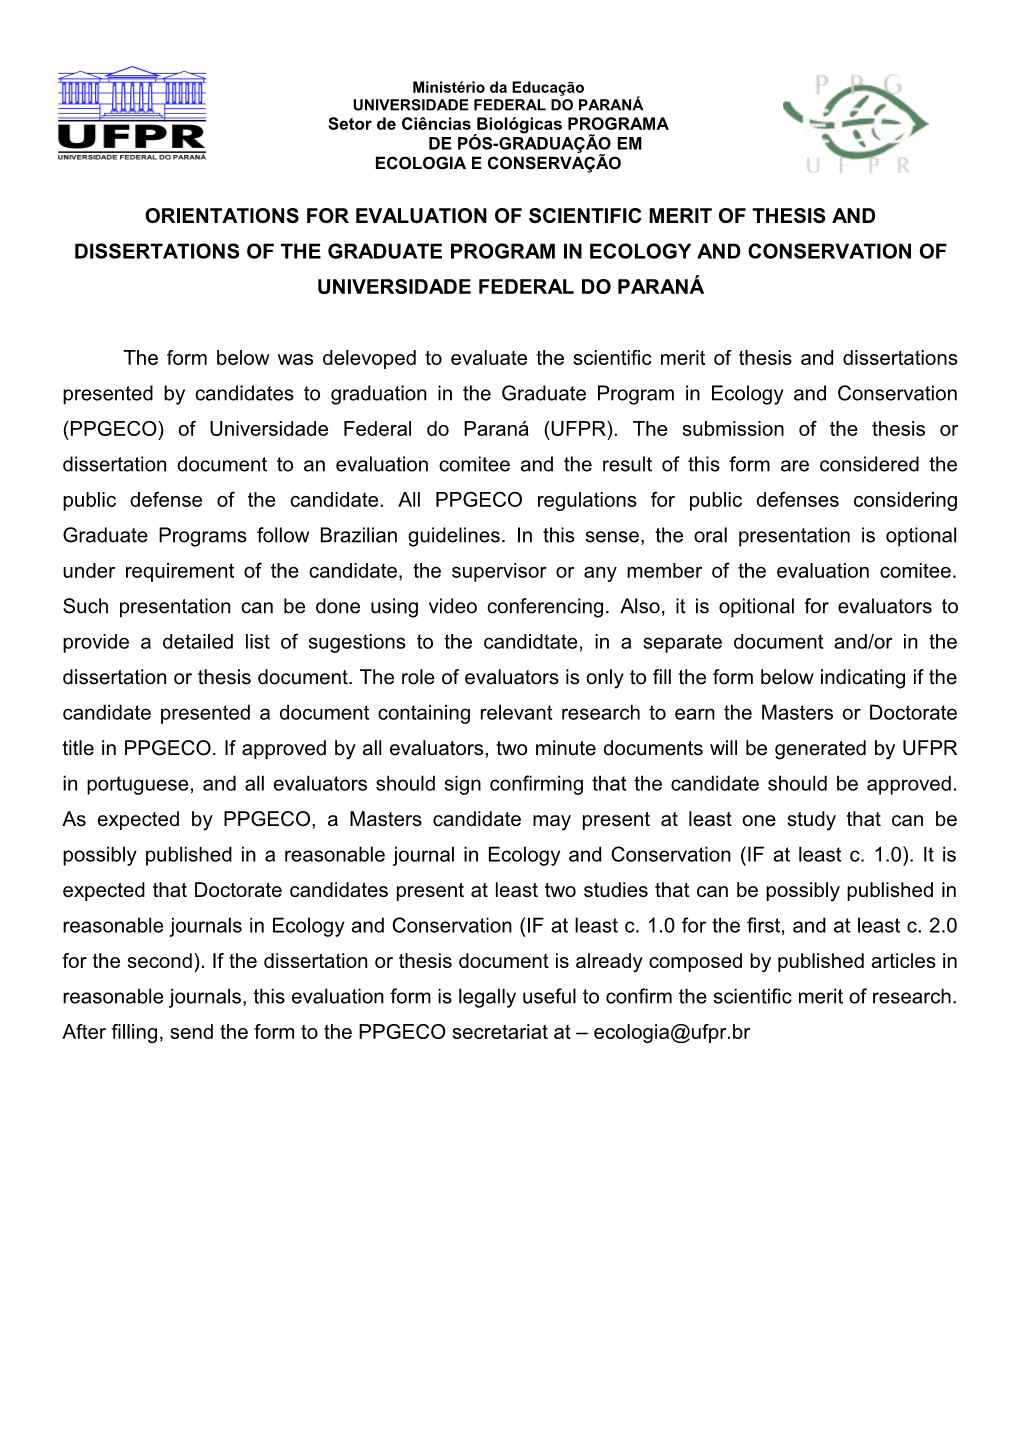 Orientations for Evaluation of Scientific Merit of Thesis and Dissertations of the Graduate